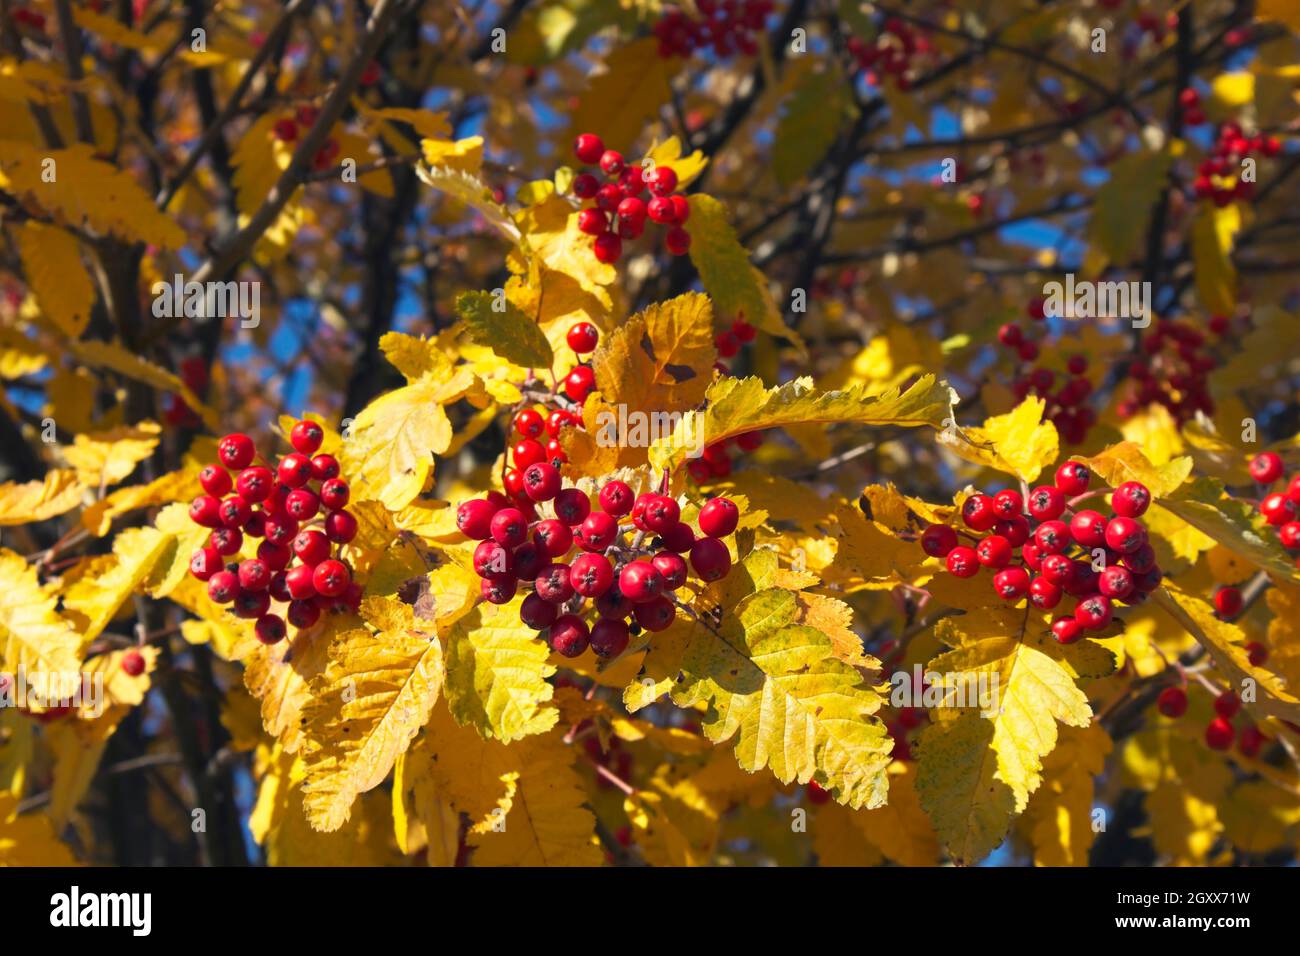 Sorbus × hybrida autumn leaves and berries, Finland Stock Photo